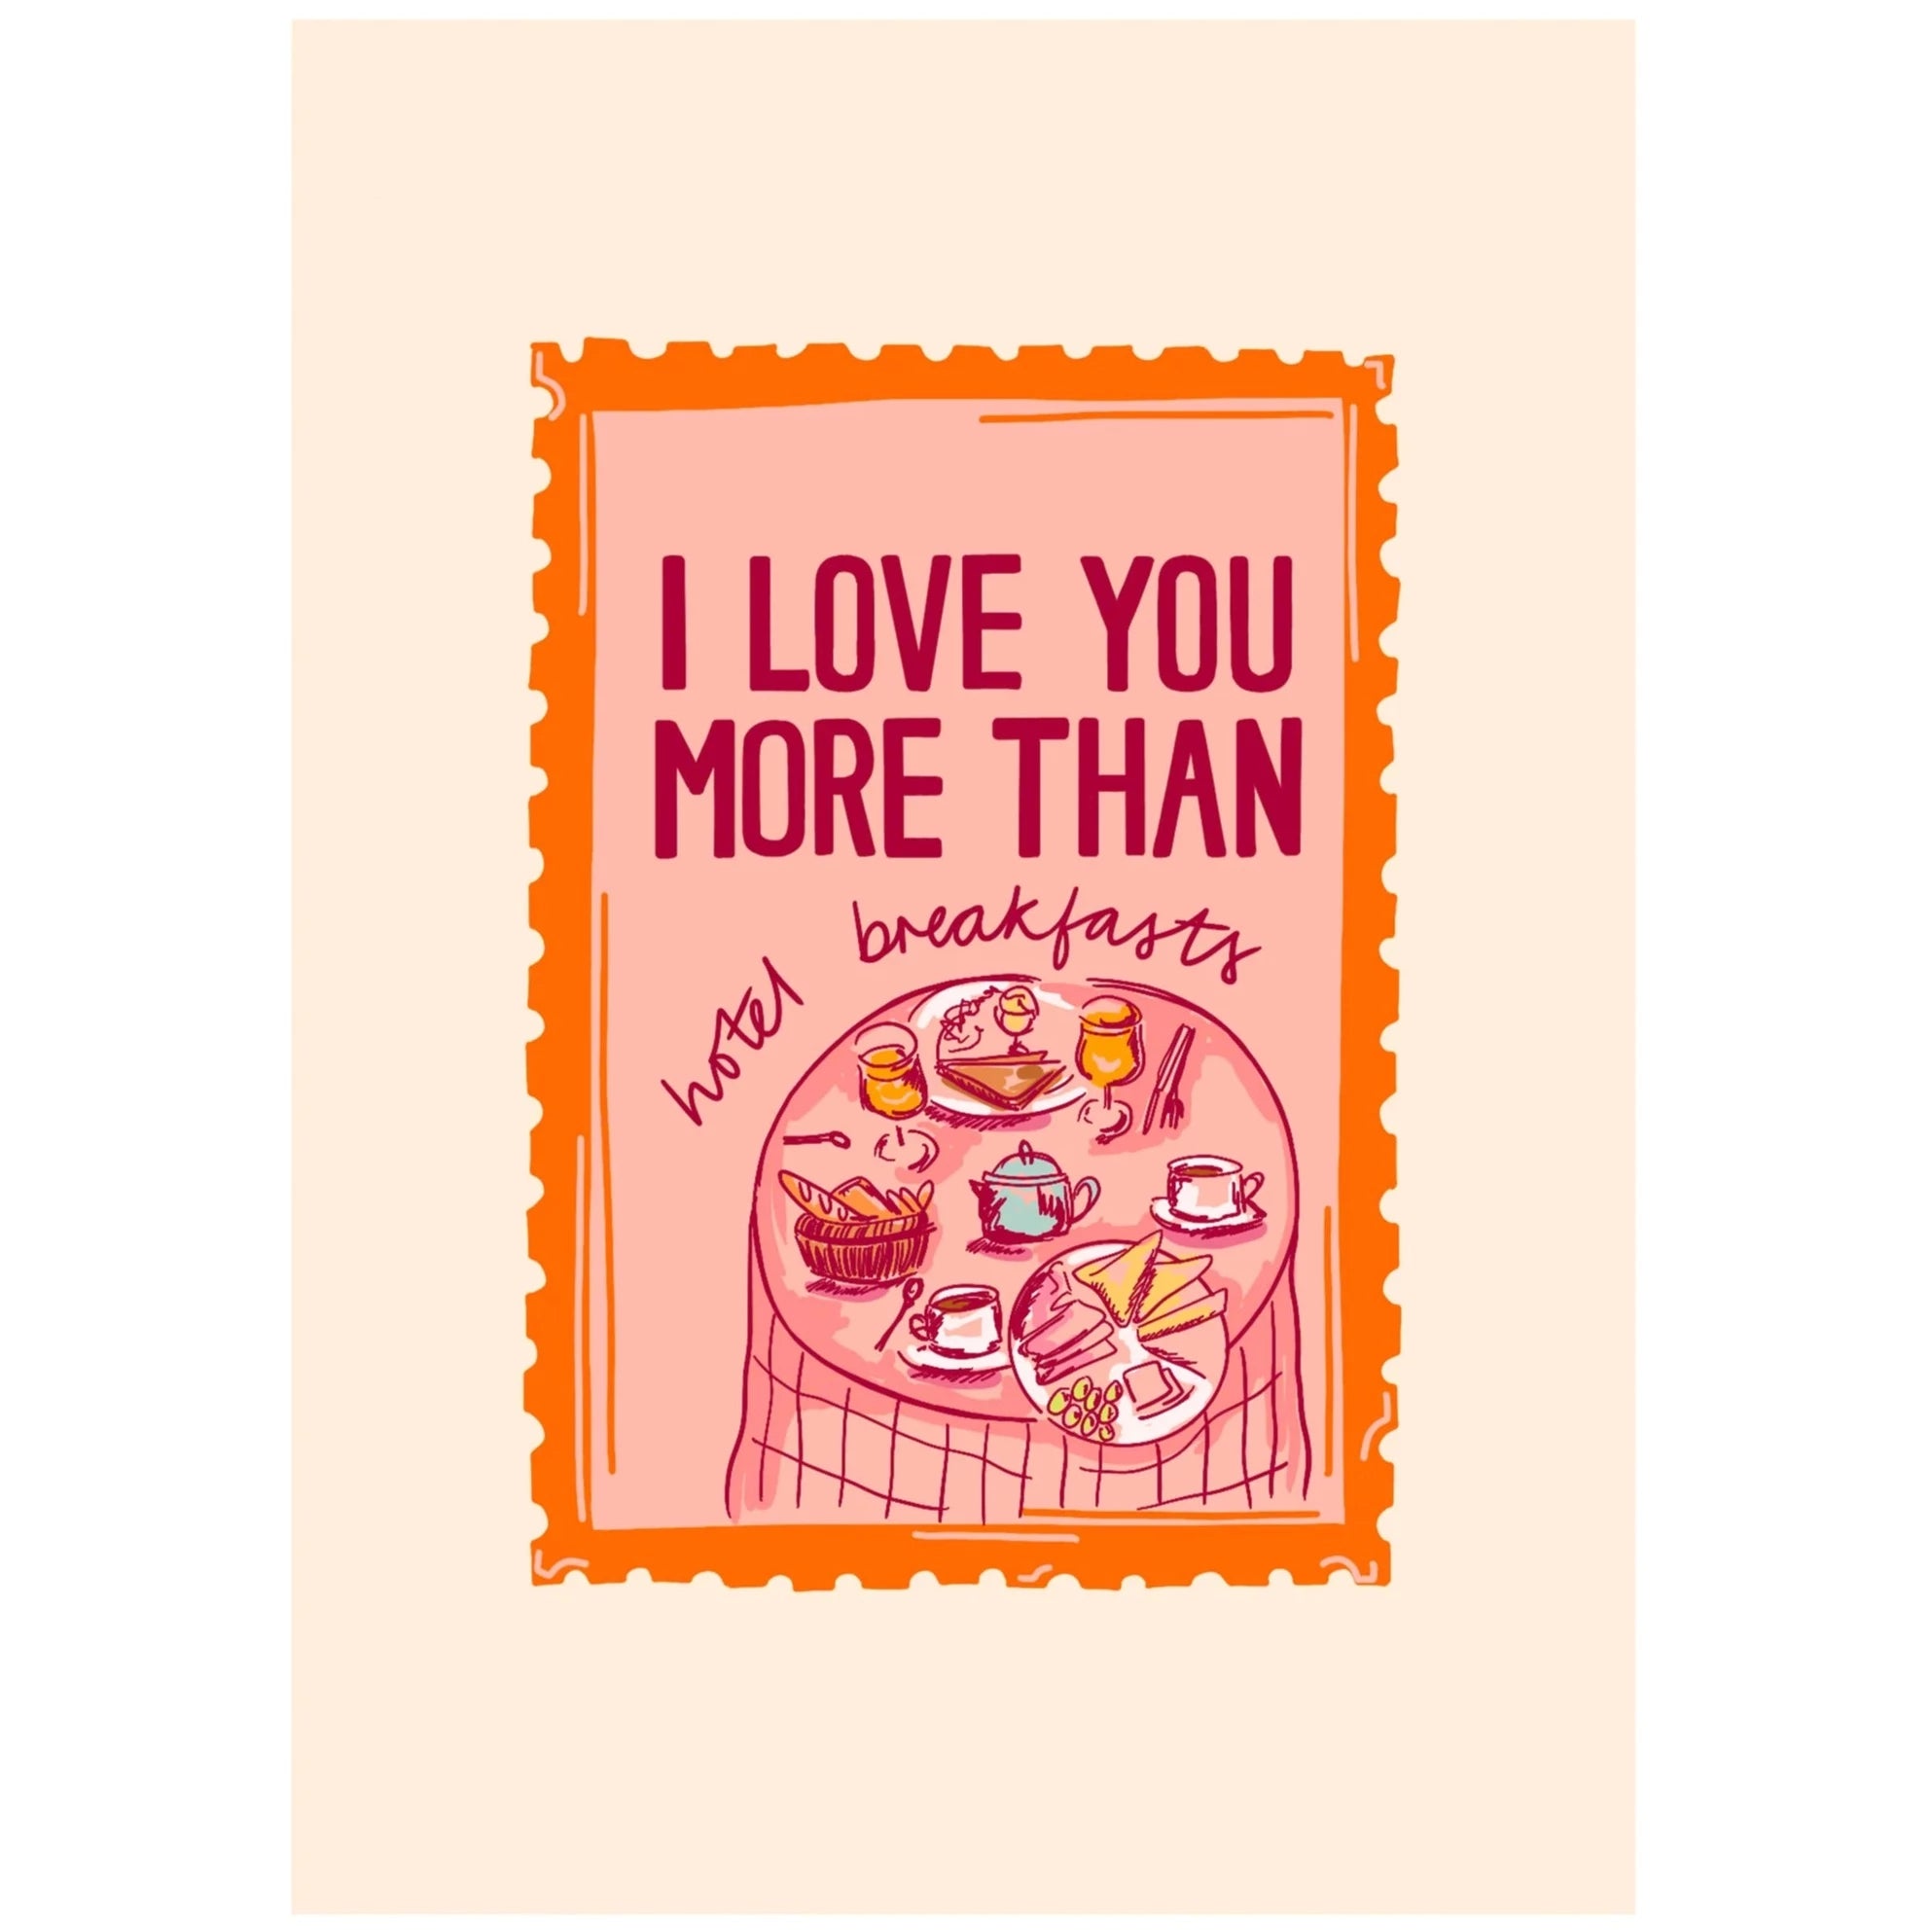 I Love You More Than Hotel Breakfasts card